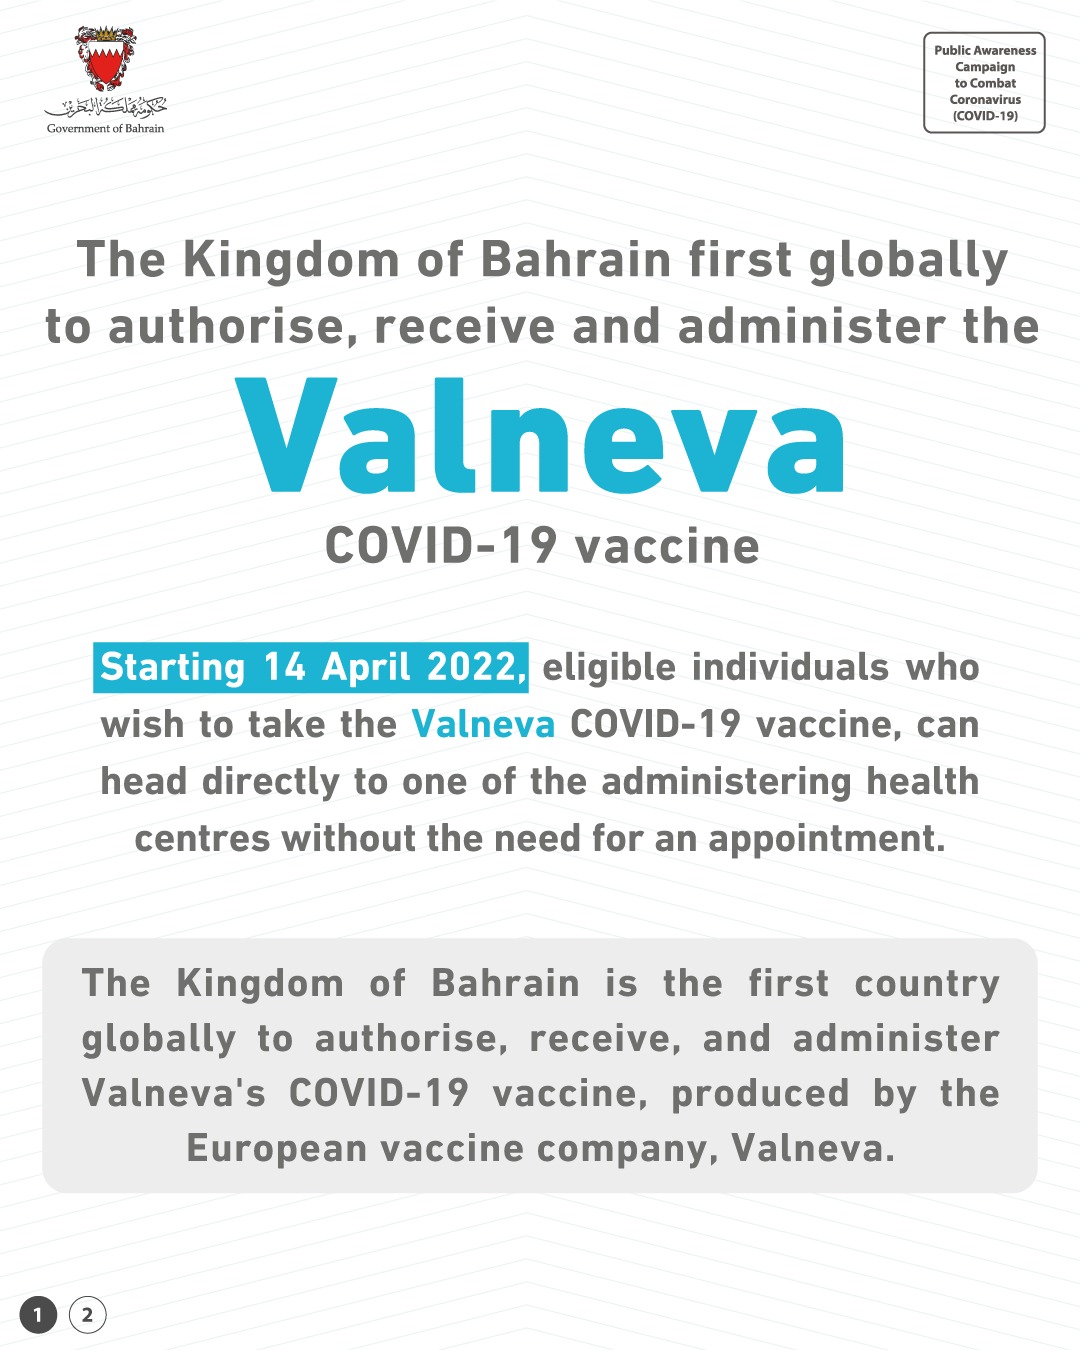 The Kingdom of Bahrain first globally to authorise, receive and administer the Valneva COVID-19 vaccine: 14 April 2022